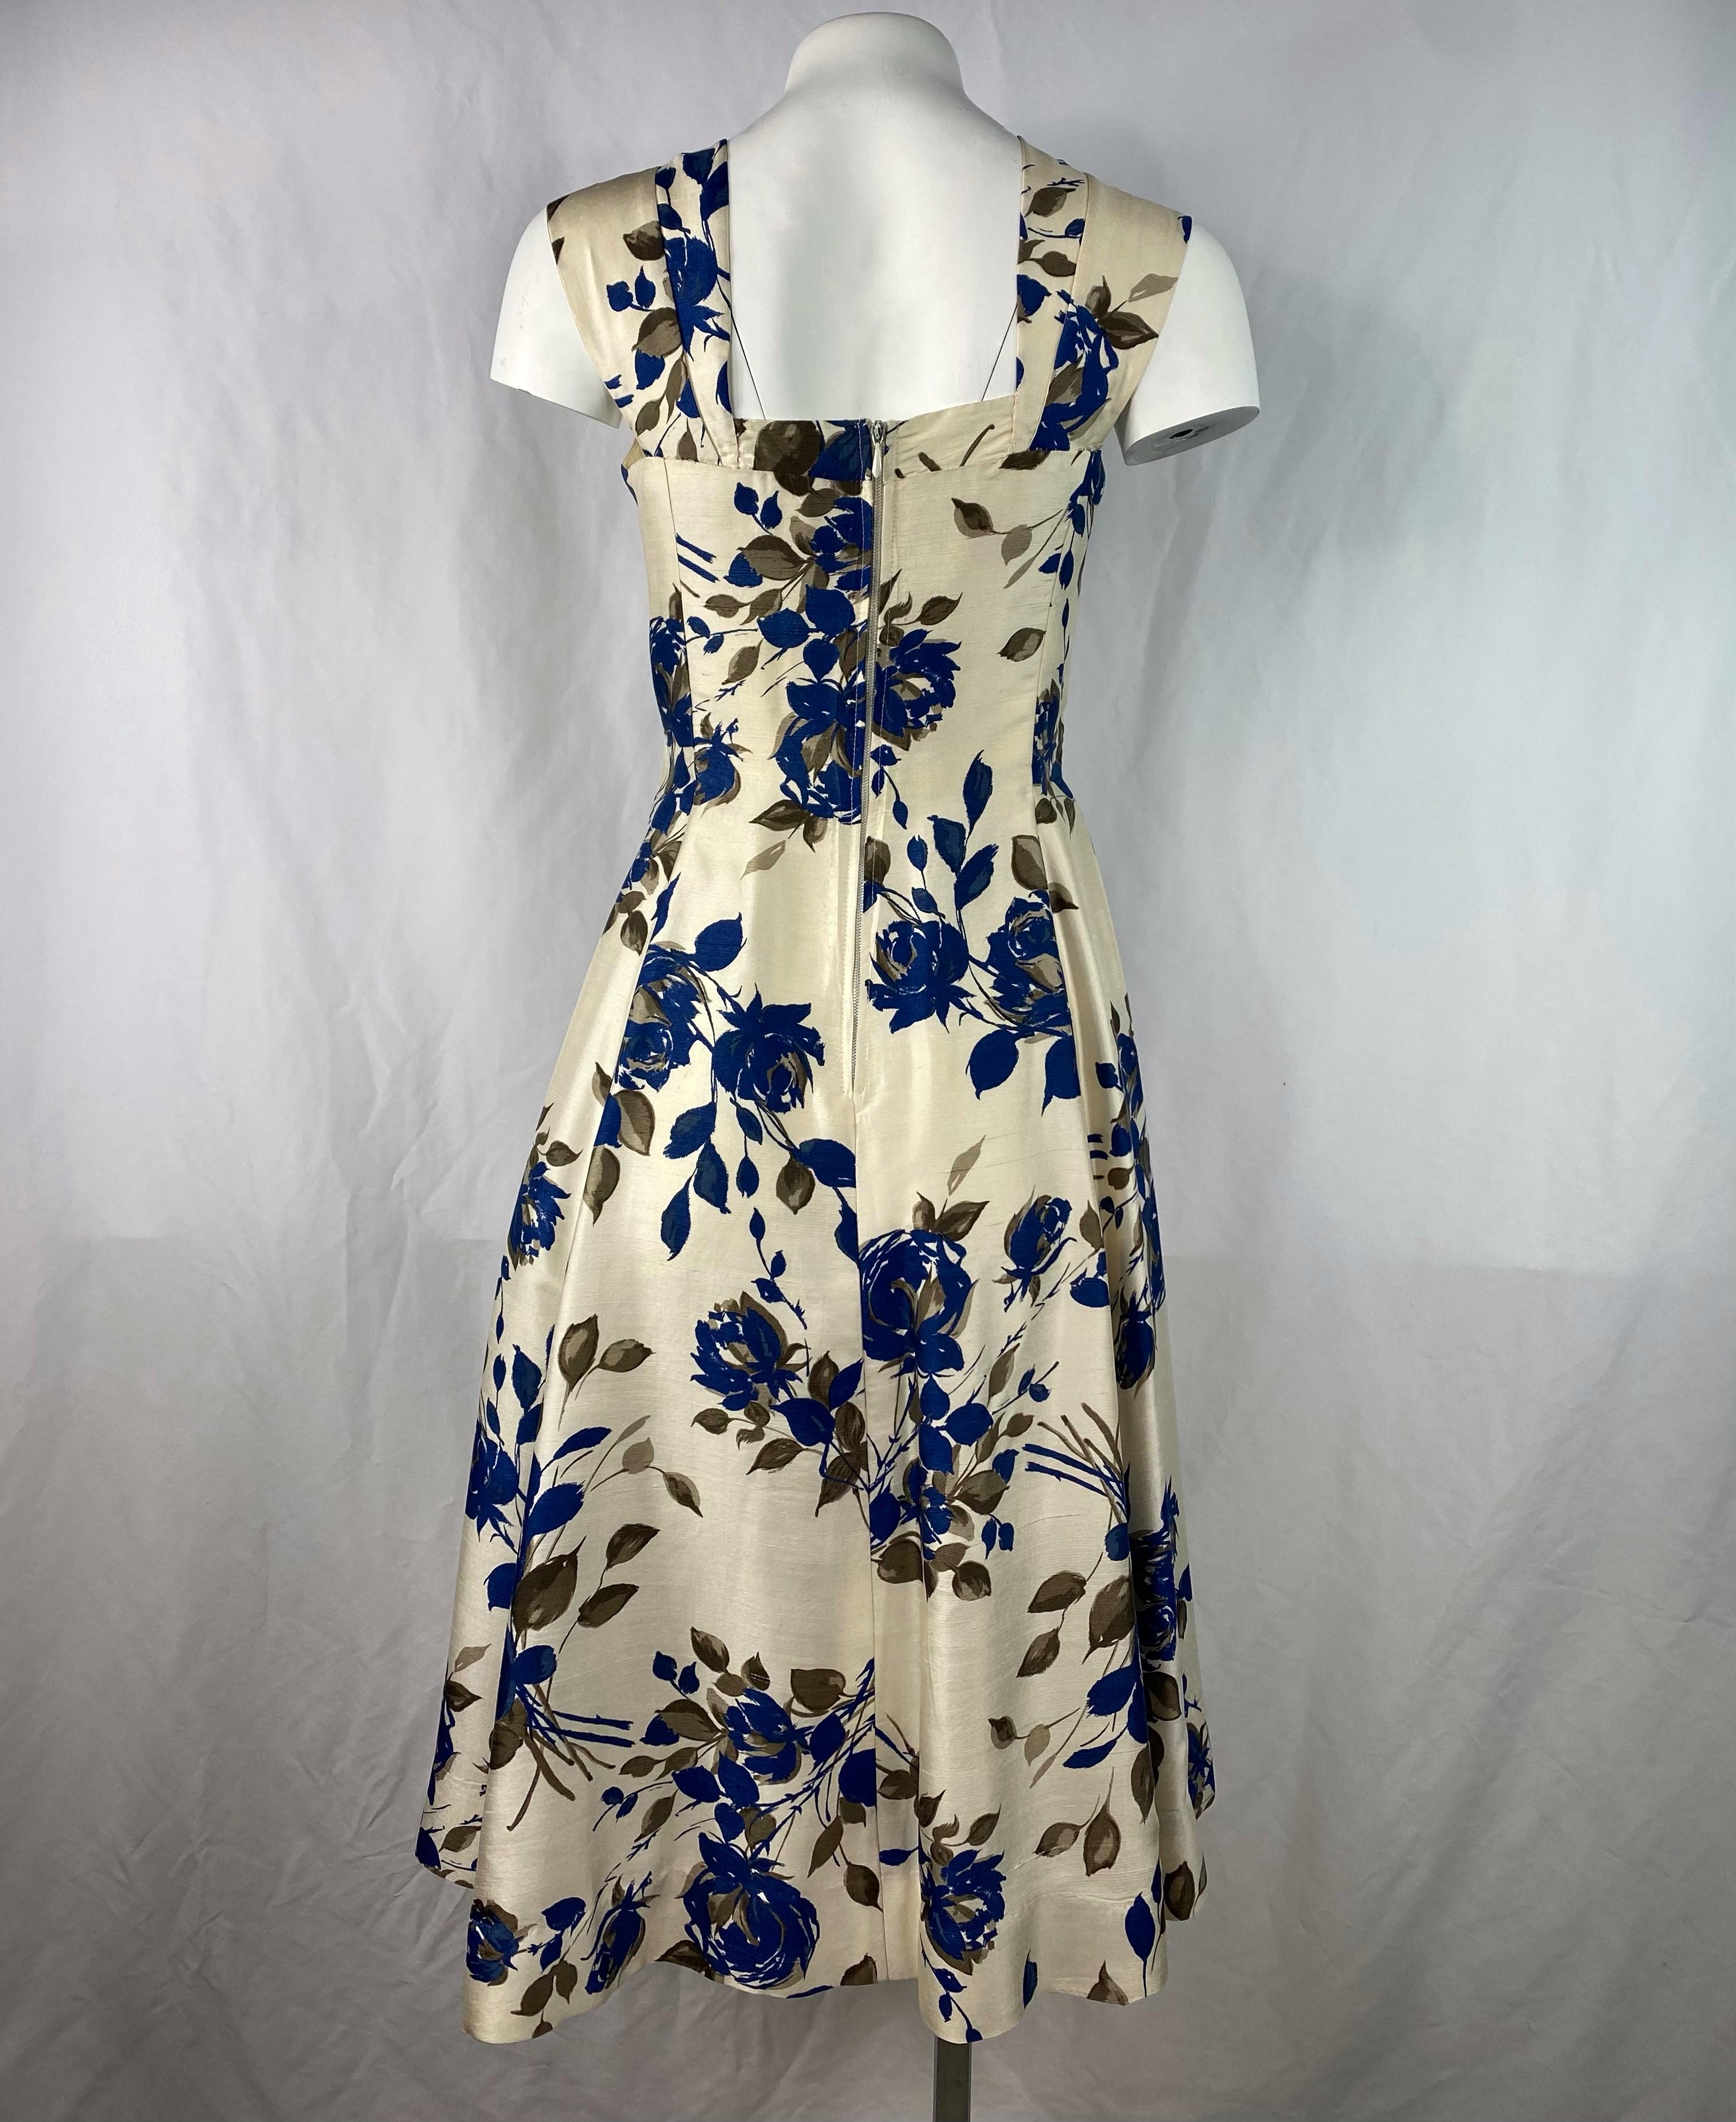 Beige Marwi Cream and Navy Floral Sleeveless Dress, Size 40 For Sale